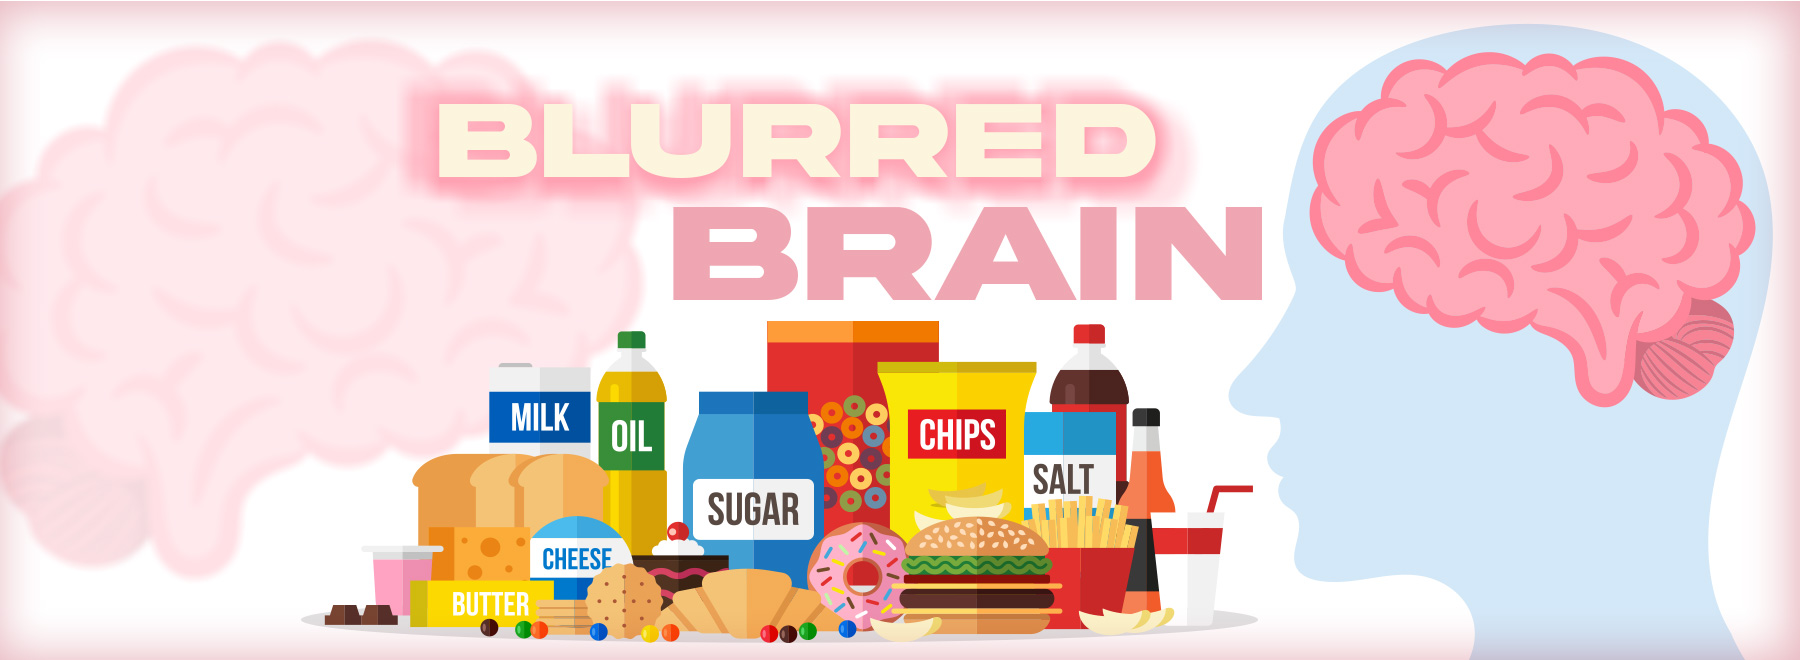 Illustration of processed foods and a slihouette of a person and a brain